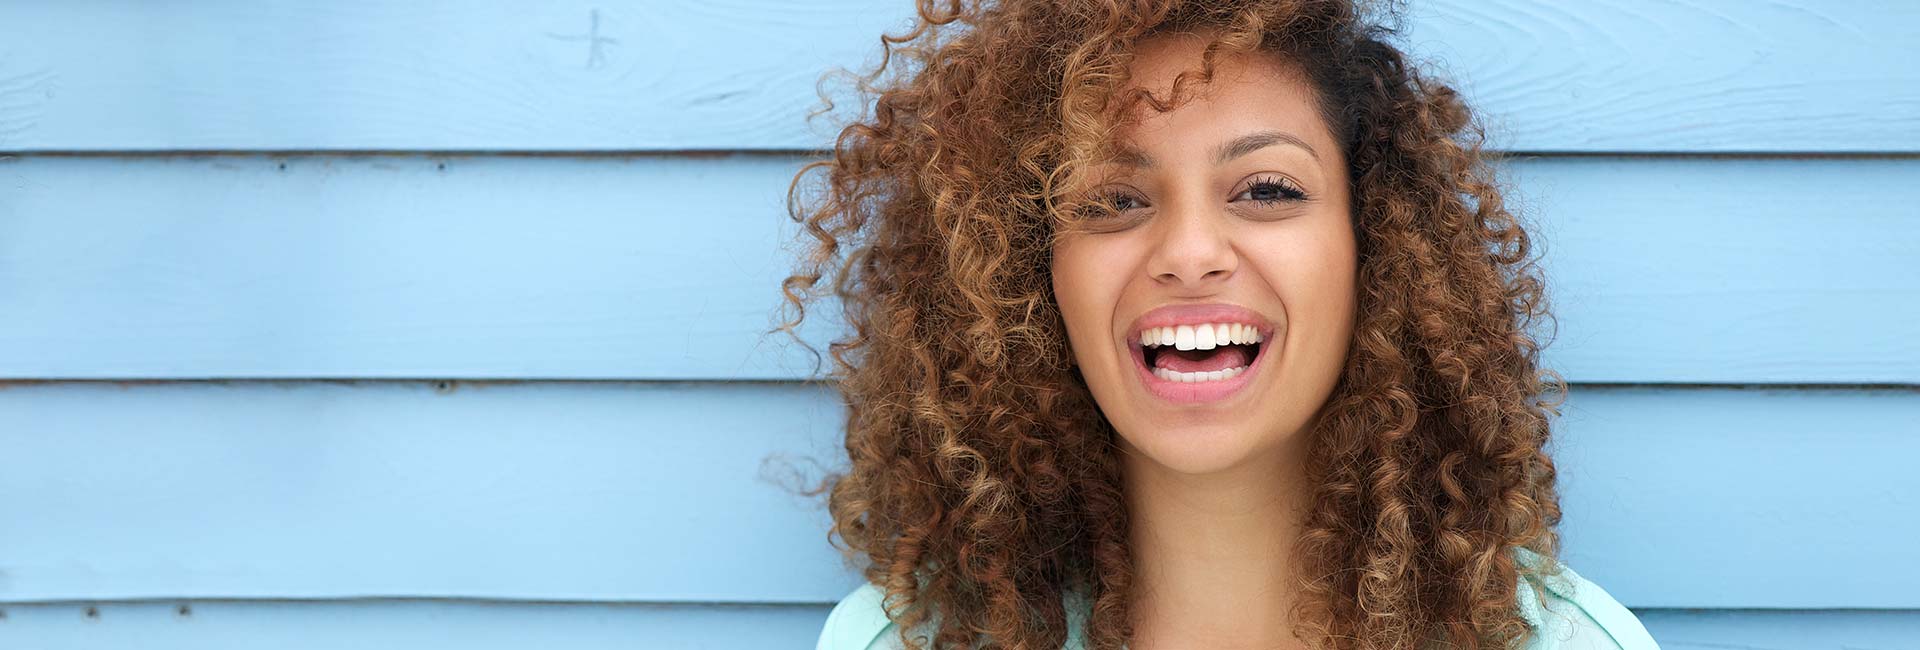 Afro American woman smiling with bright white teeth